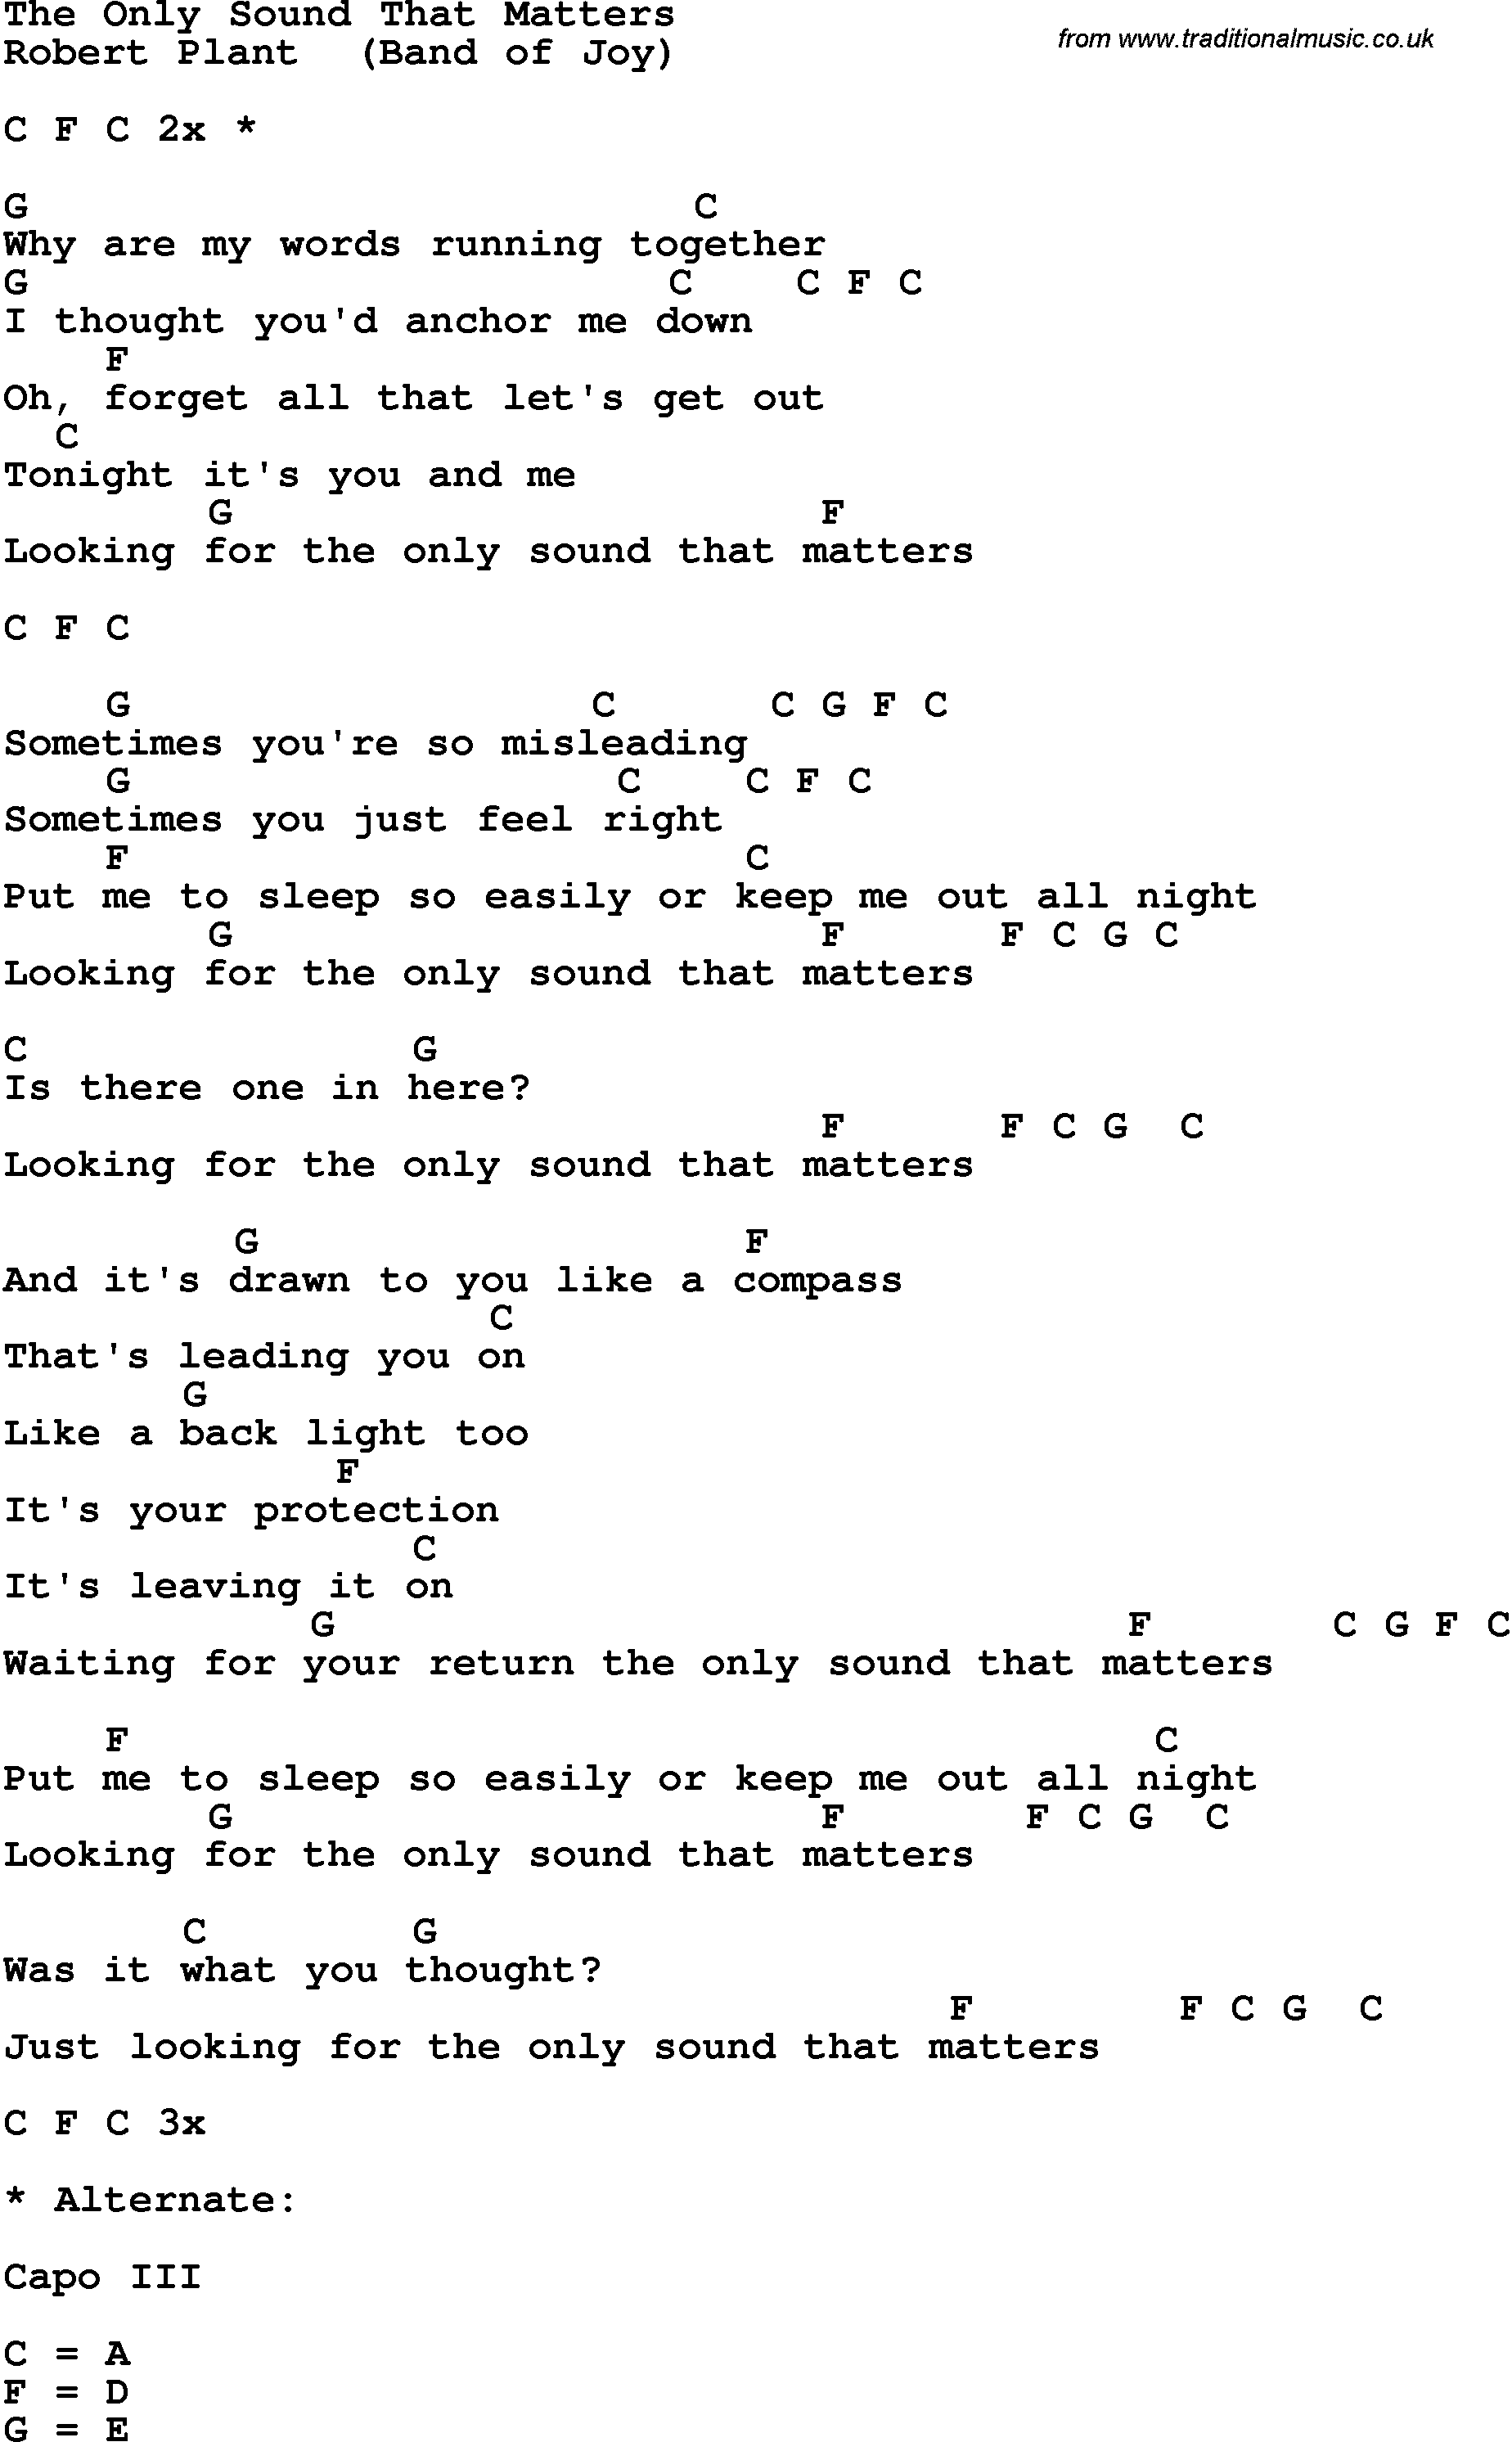 Song Lyrics with guitar chords for The Only Sound That Matters